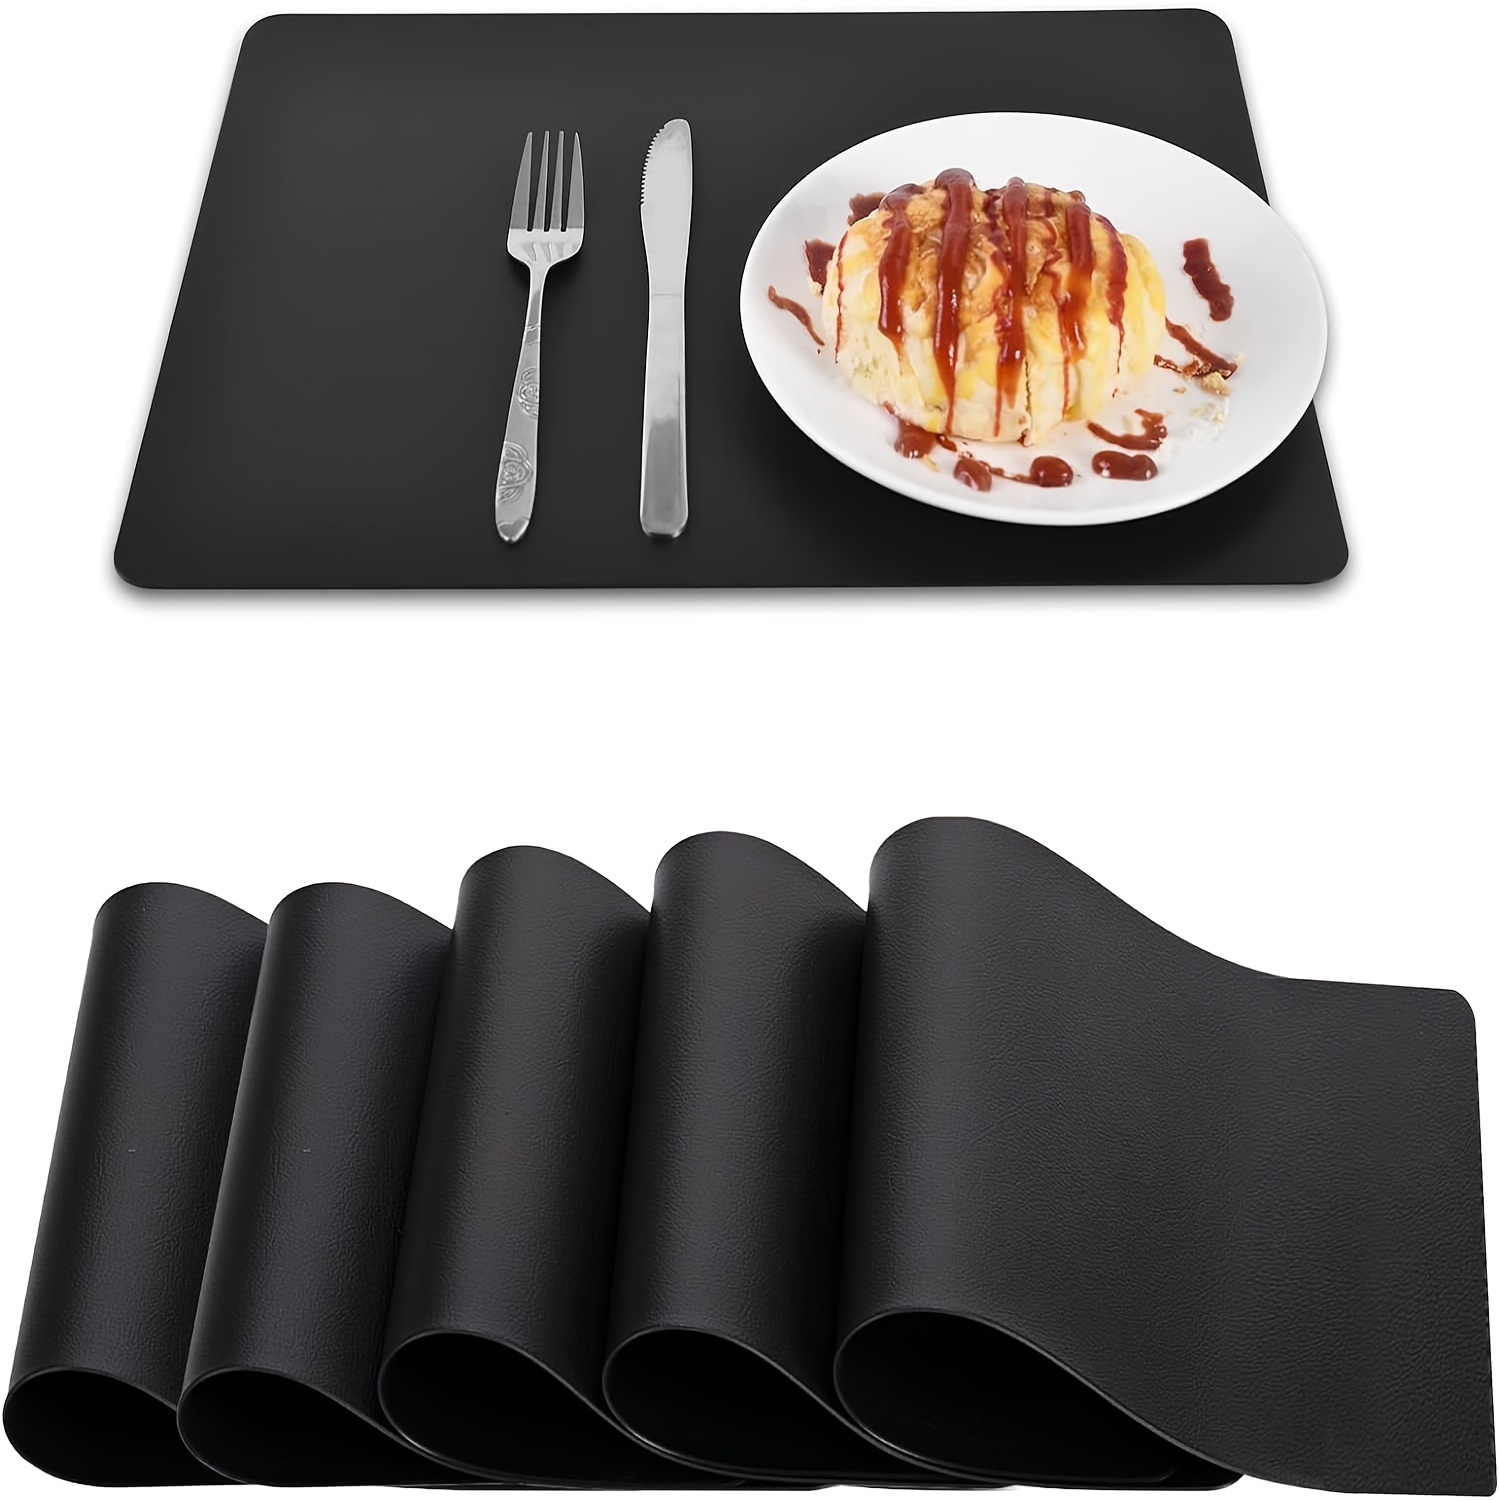 

6-pack Square Leather Place Mats, Heat-resistant Waterproof Table Mats, Hand Wash Only, Non-textile Weaving, 40x30cm For Kitchen Dining Indoor Outdoor Use